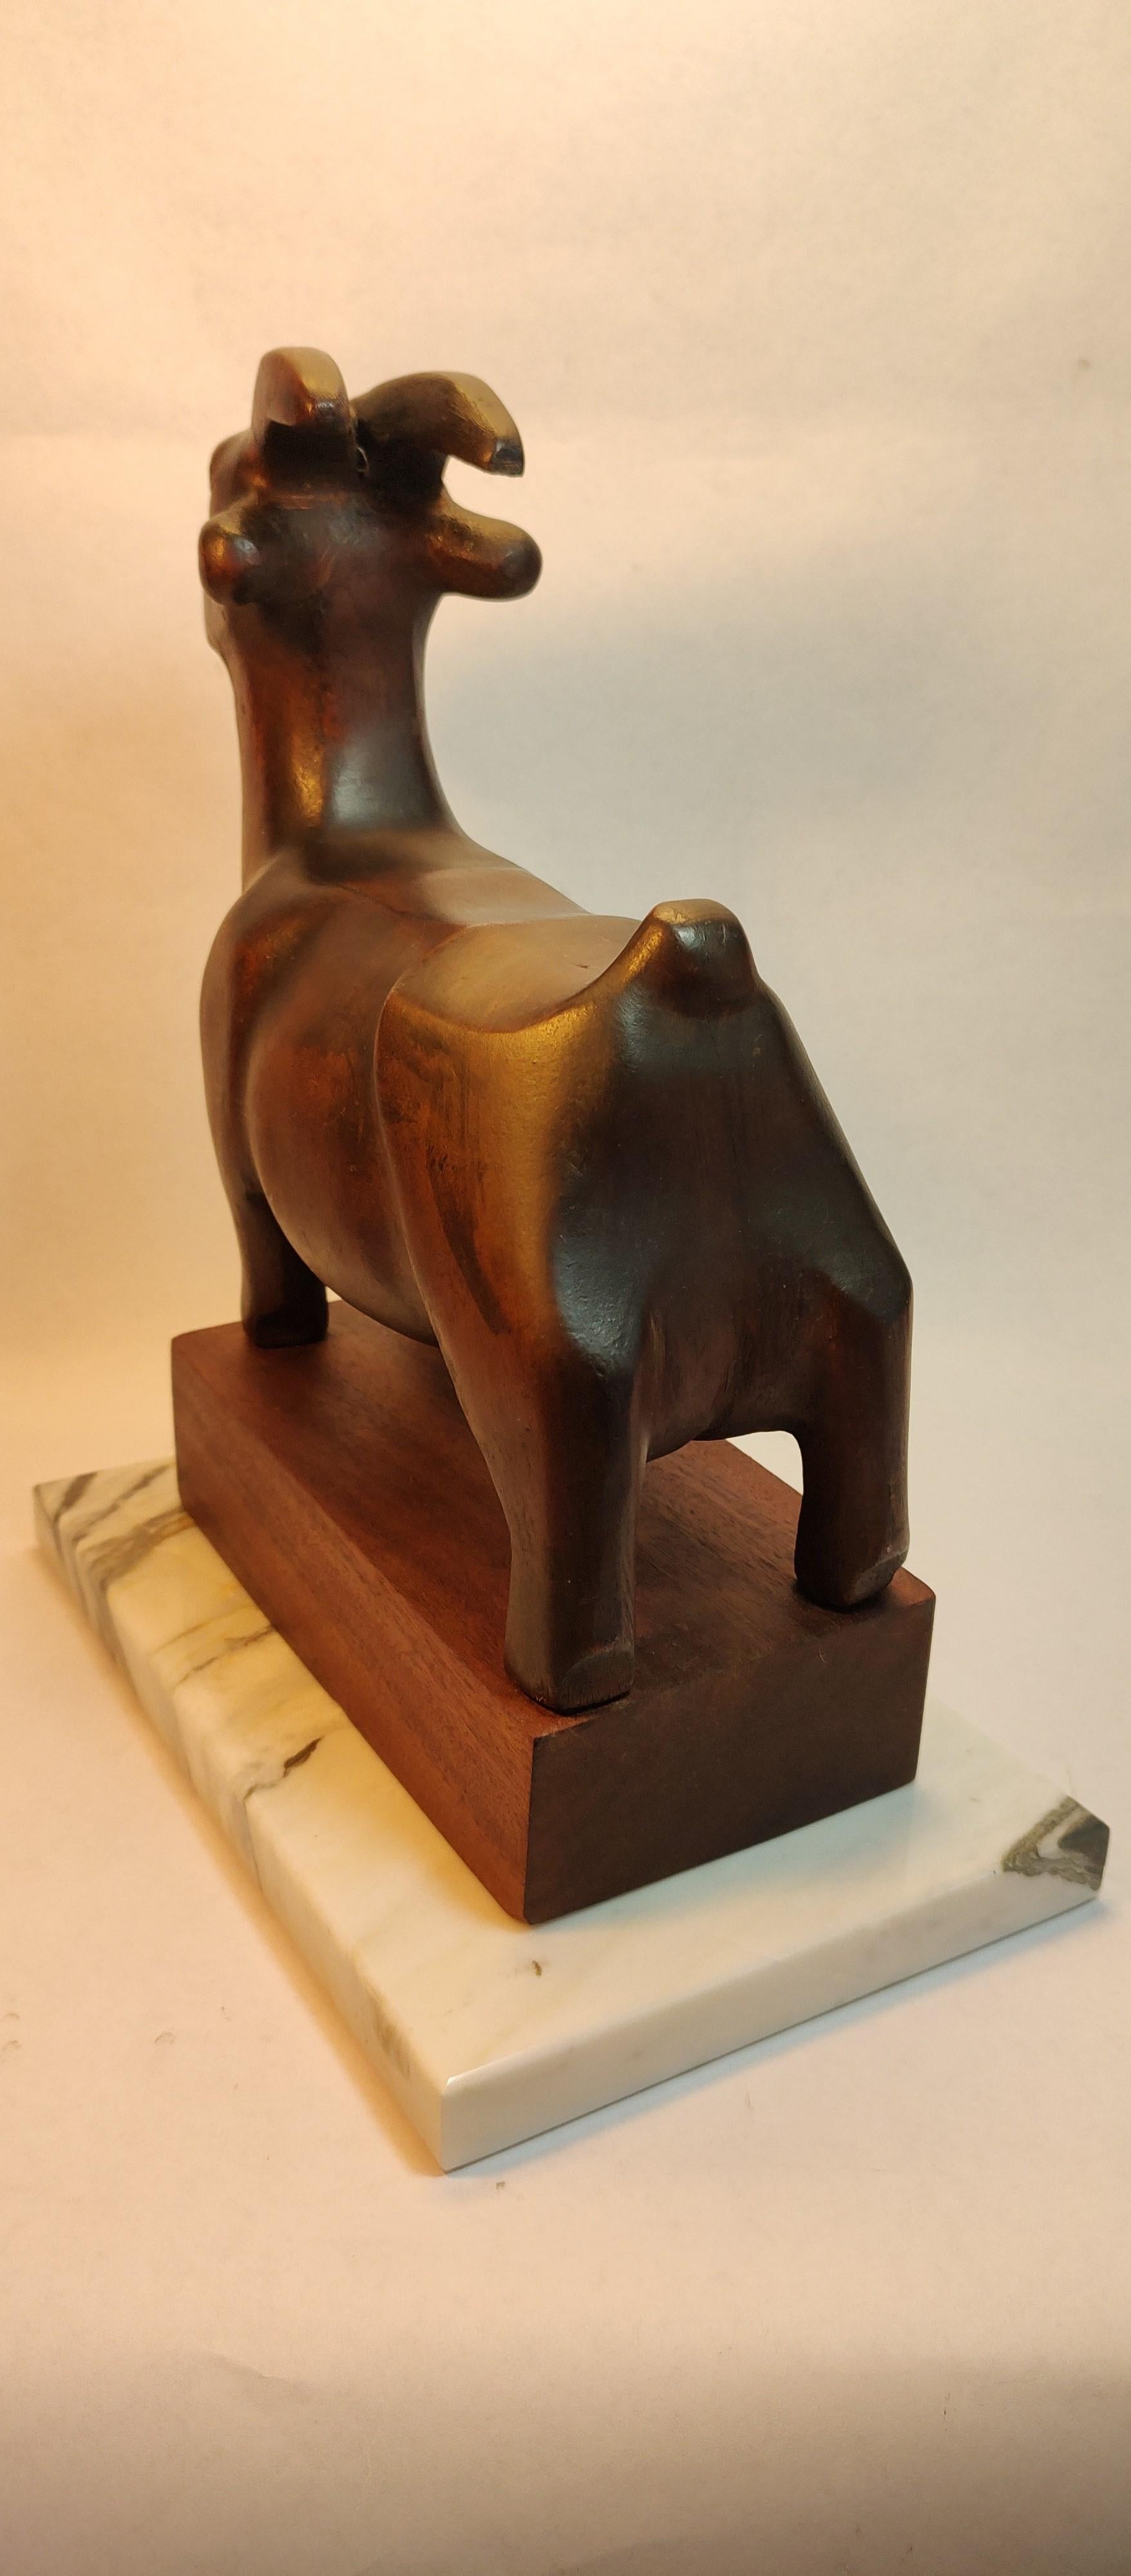 Hand-Carved Beautiful Sculpture of Goat carved in wood by Israeli Artist For Sale